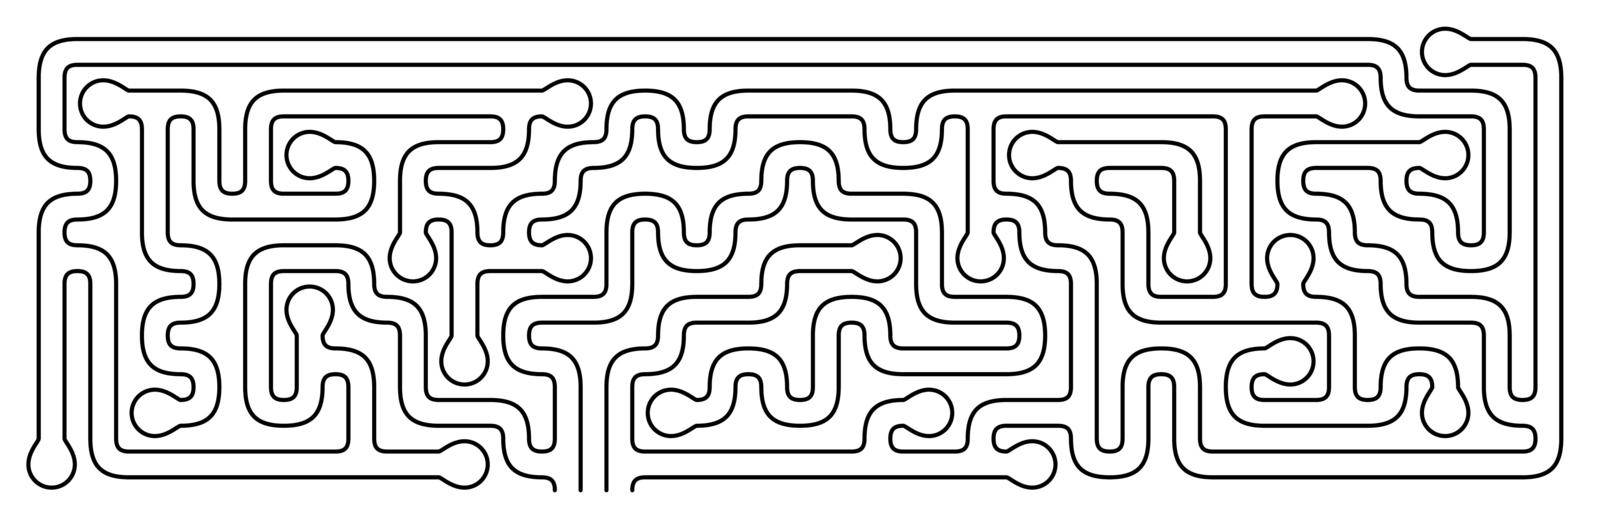 Vector illustration of maze or labyrinth isolated on white background by Whatawin